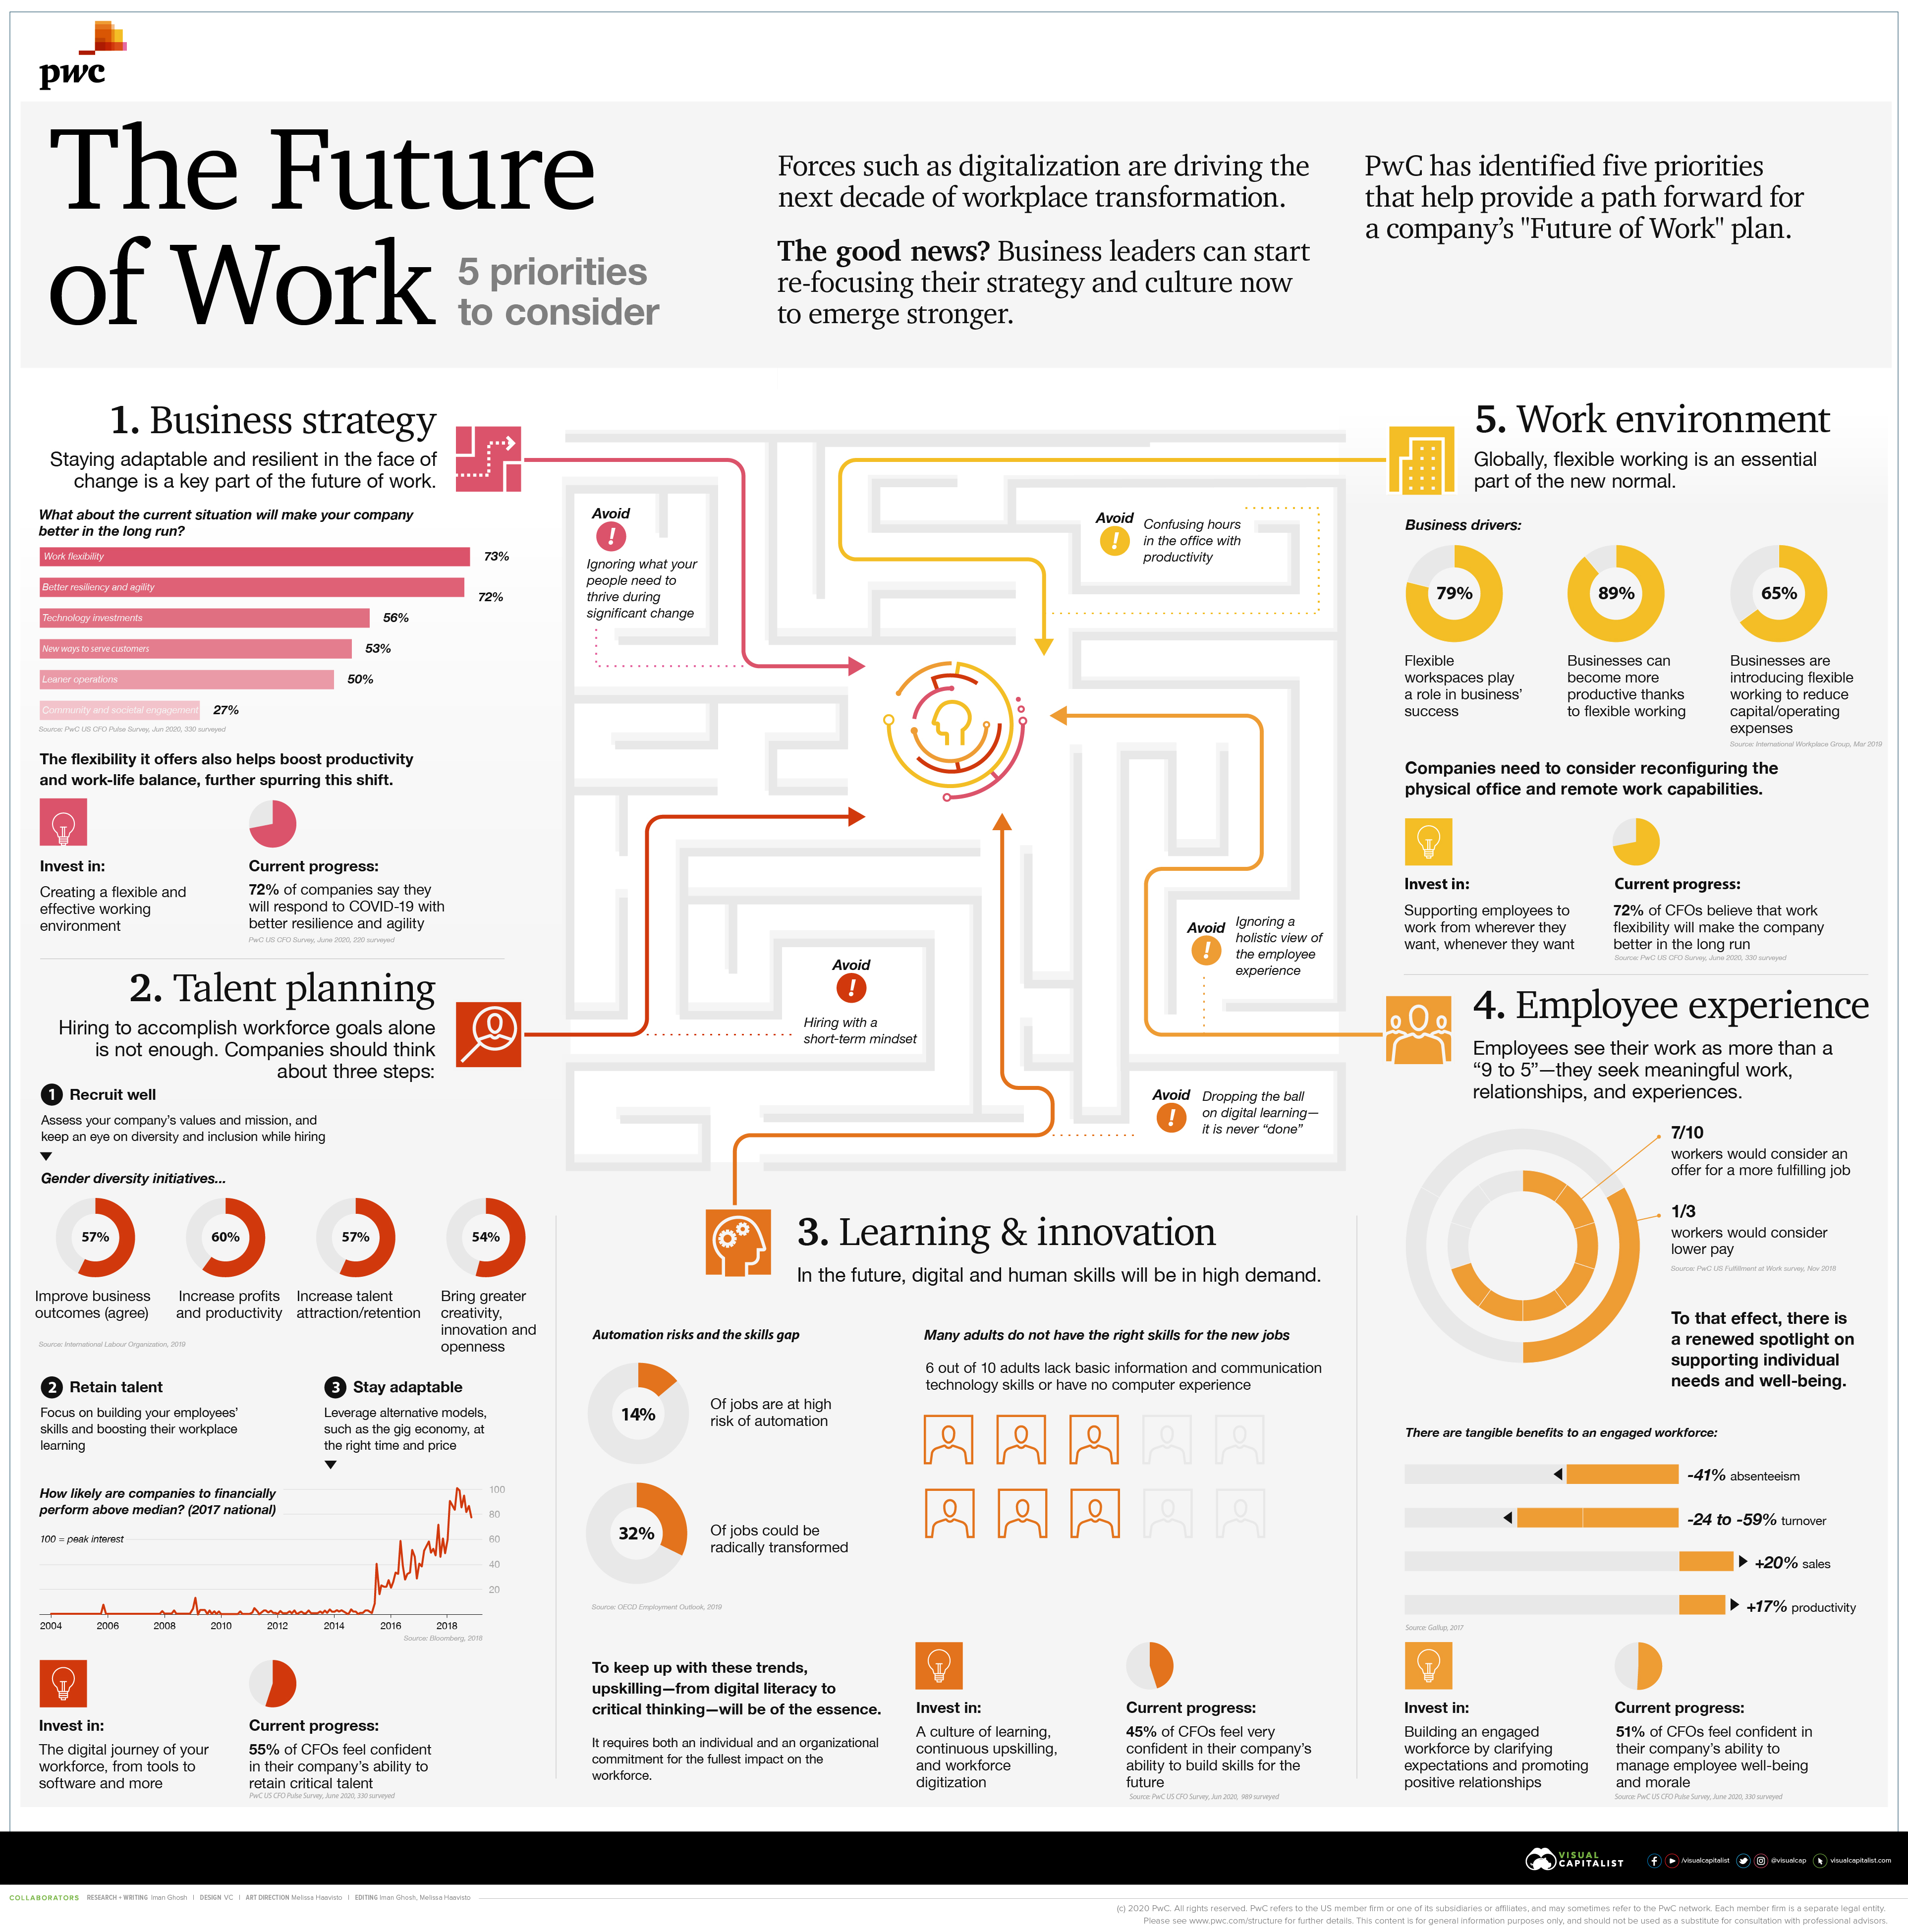 Five Business Priorities for the Future of Work